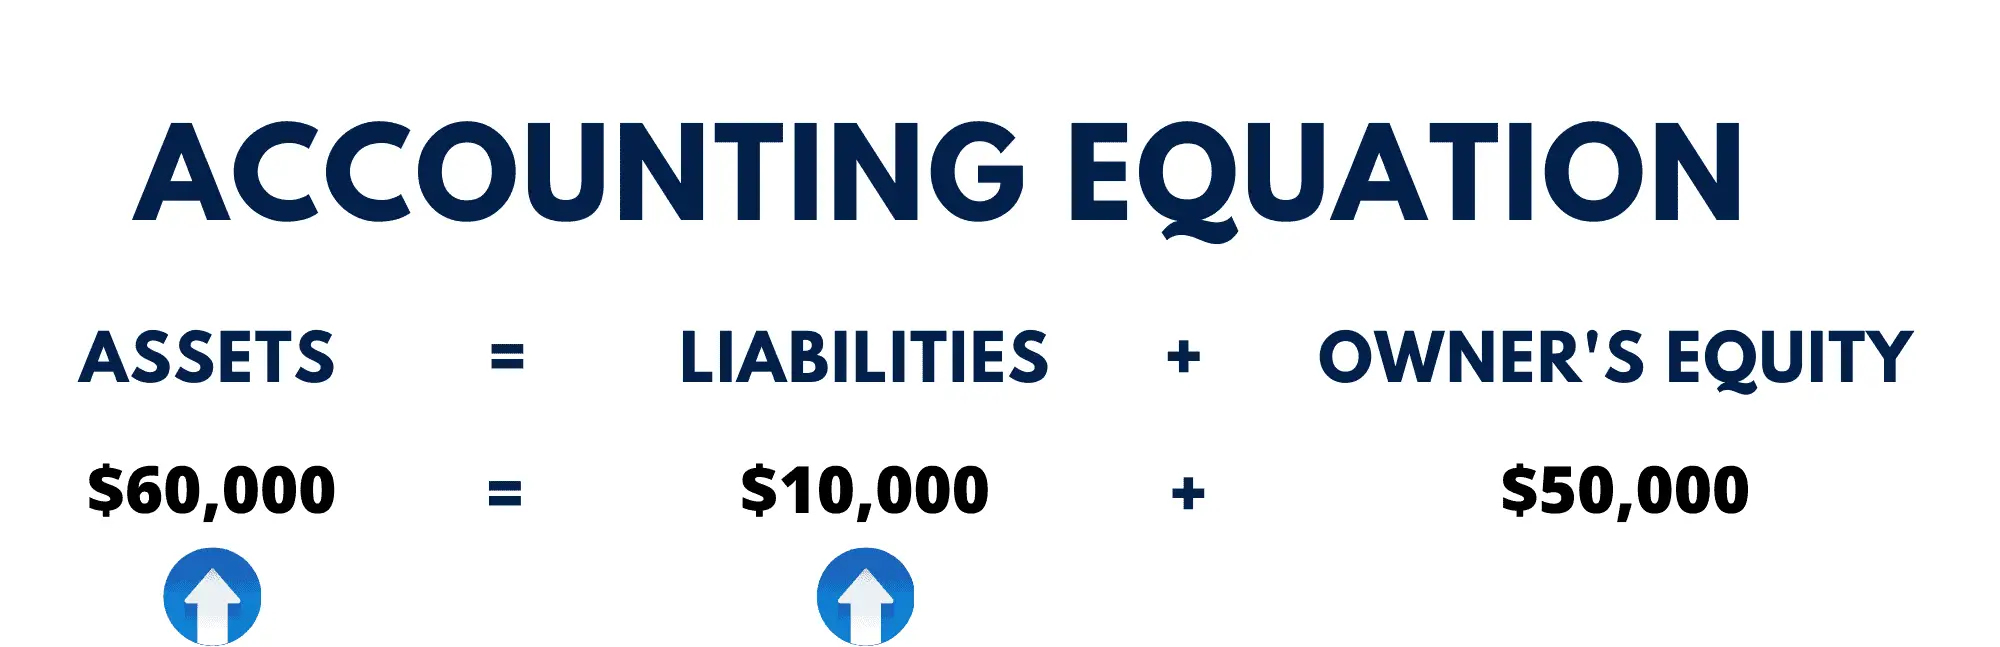 Assets $60,000 = Liabilities $10,000 + Equity $50,000